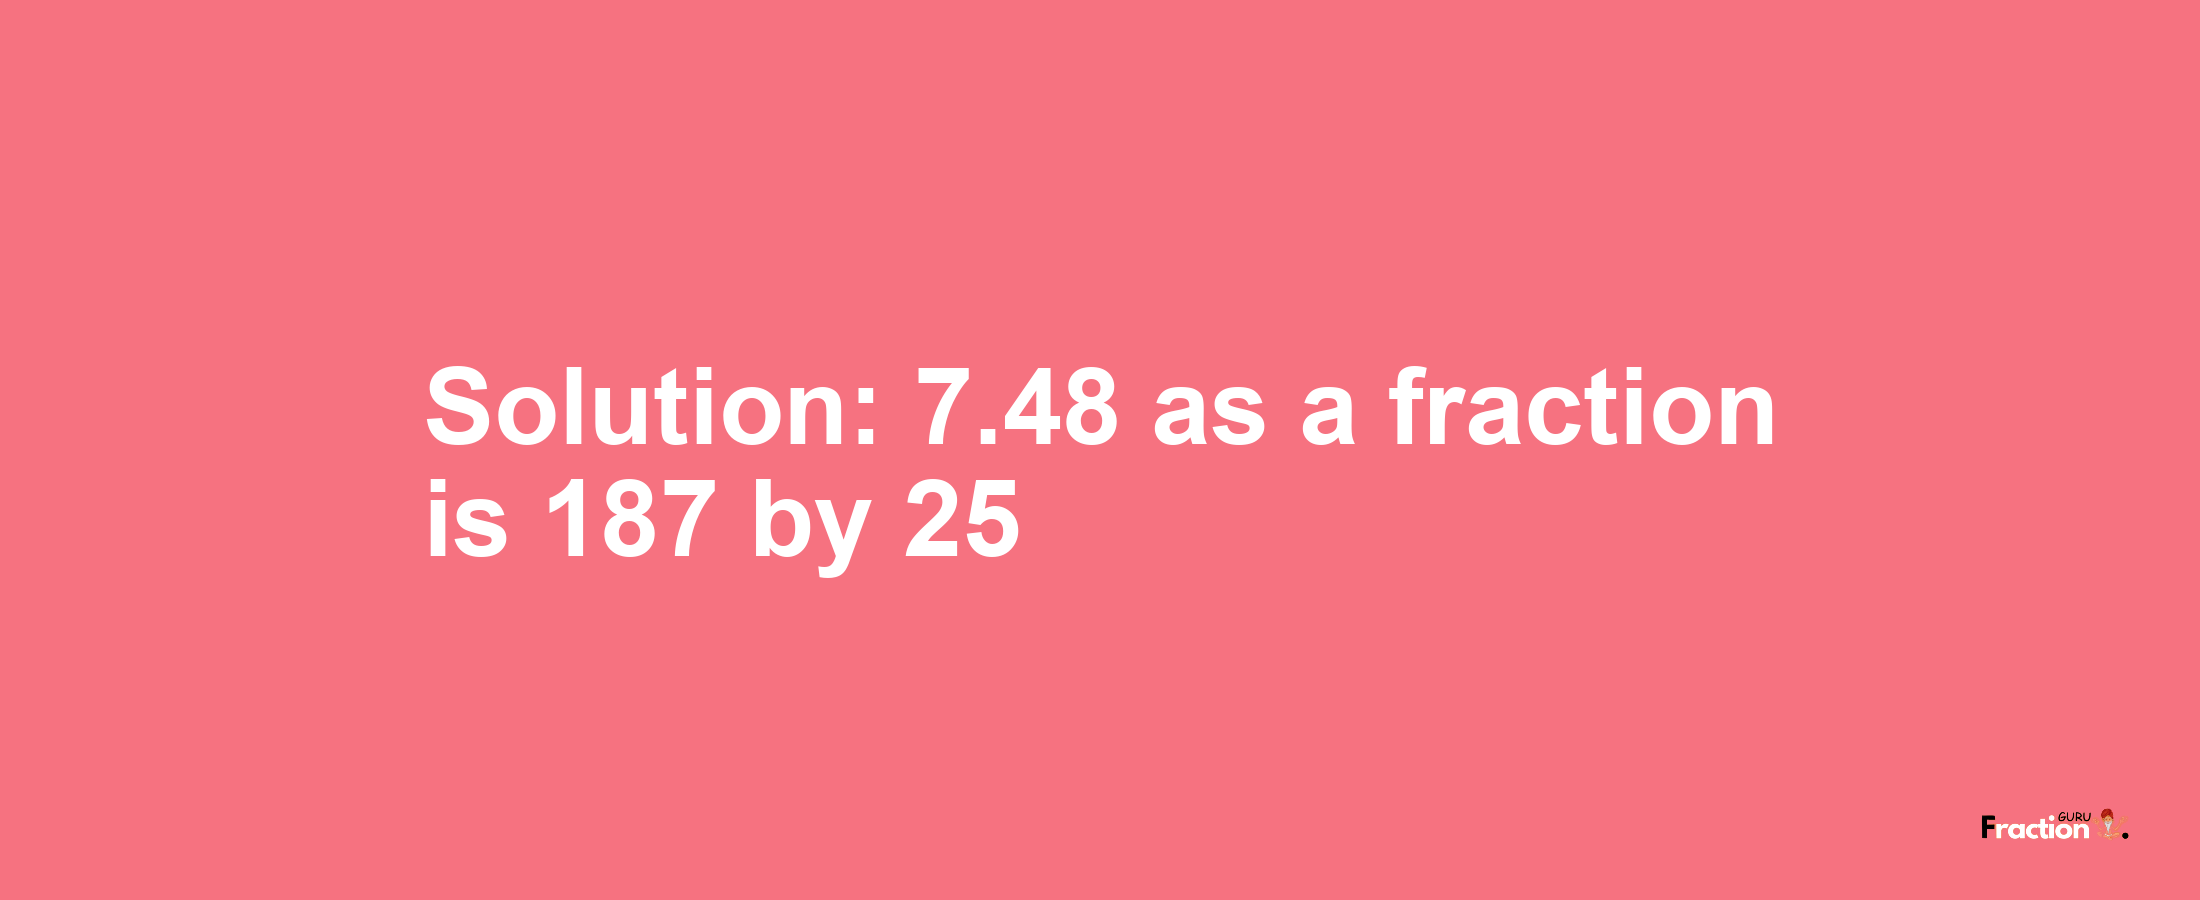 Solution:7.48 as a fraction is 187/25